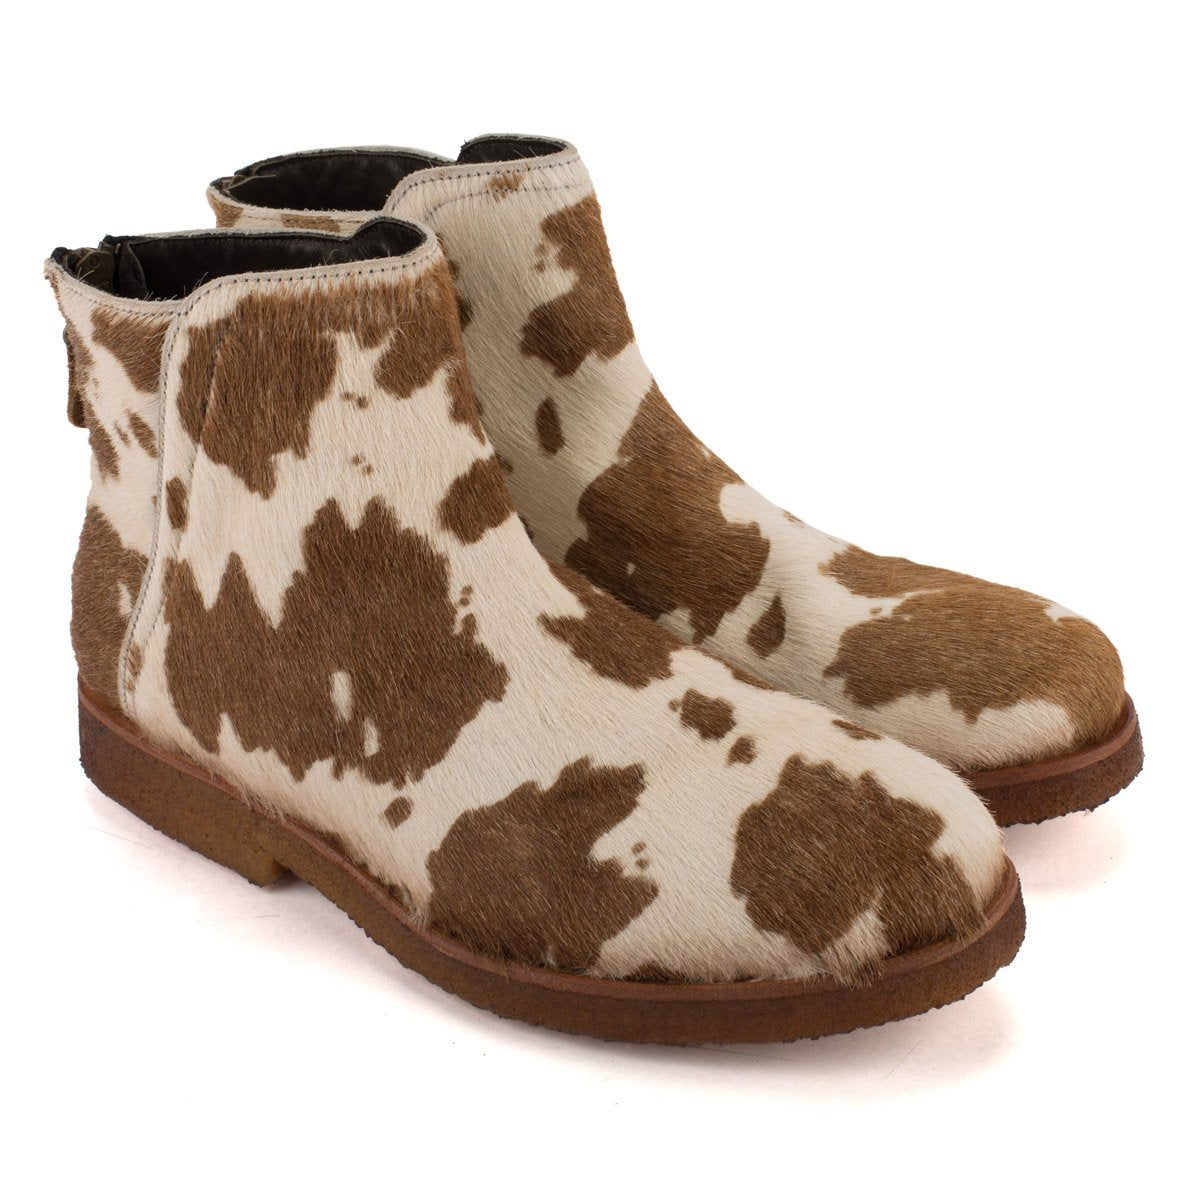 DRESS05 PONY ANKLE BOOTS – Cow